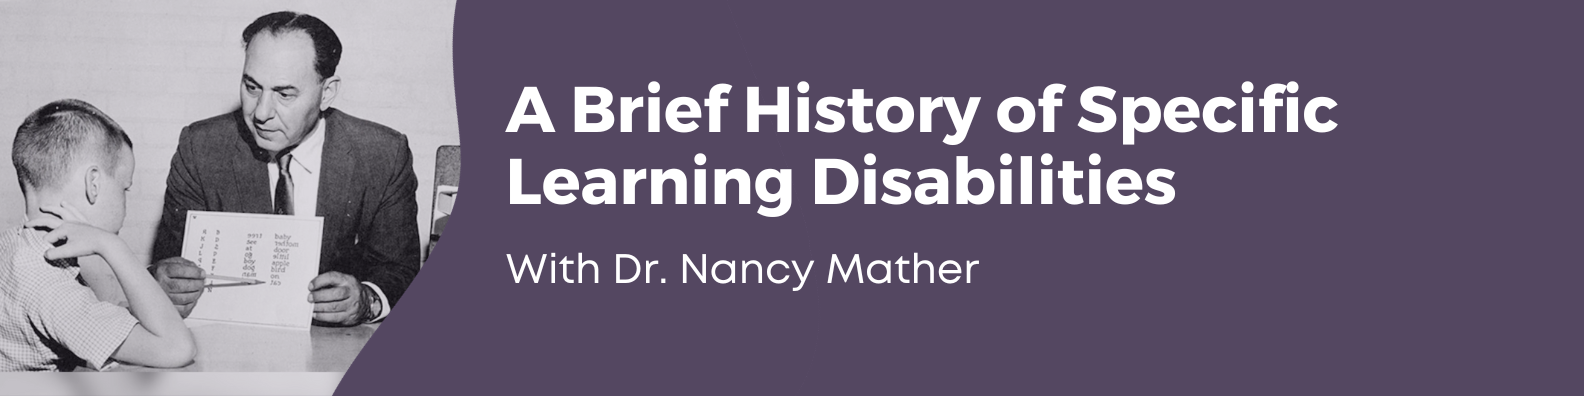 A Brief History of Specific Learning Disabilities. With Dr. Nancy Mather.